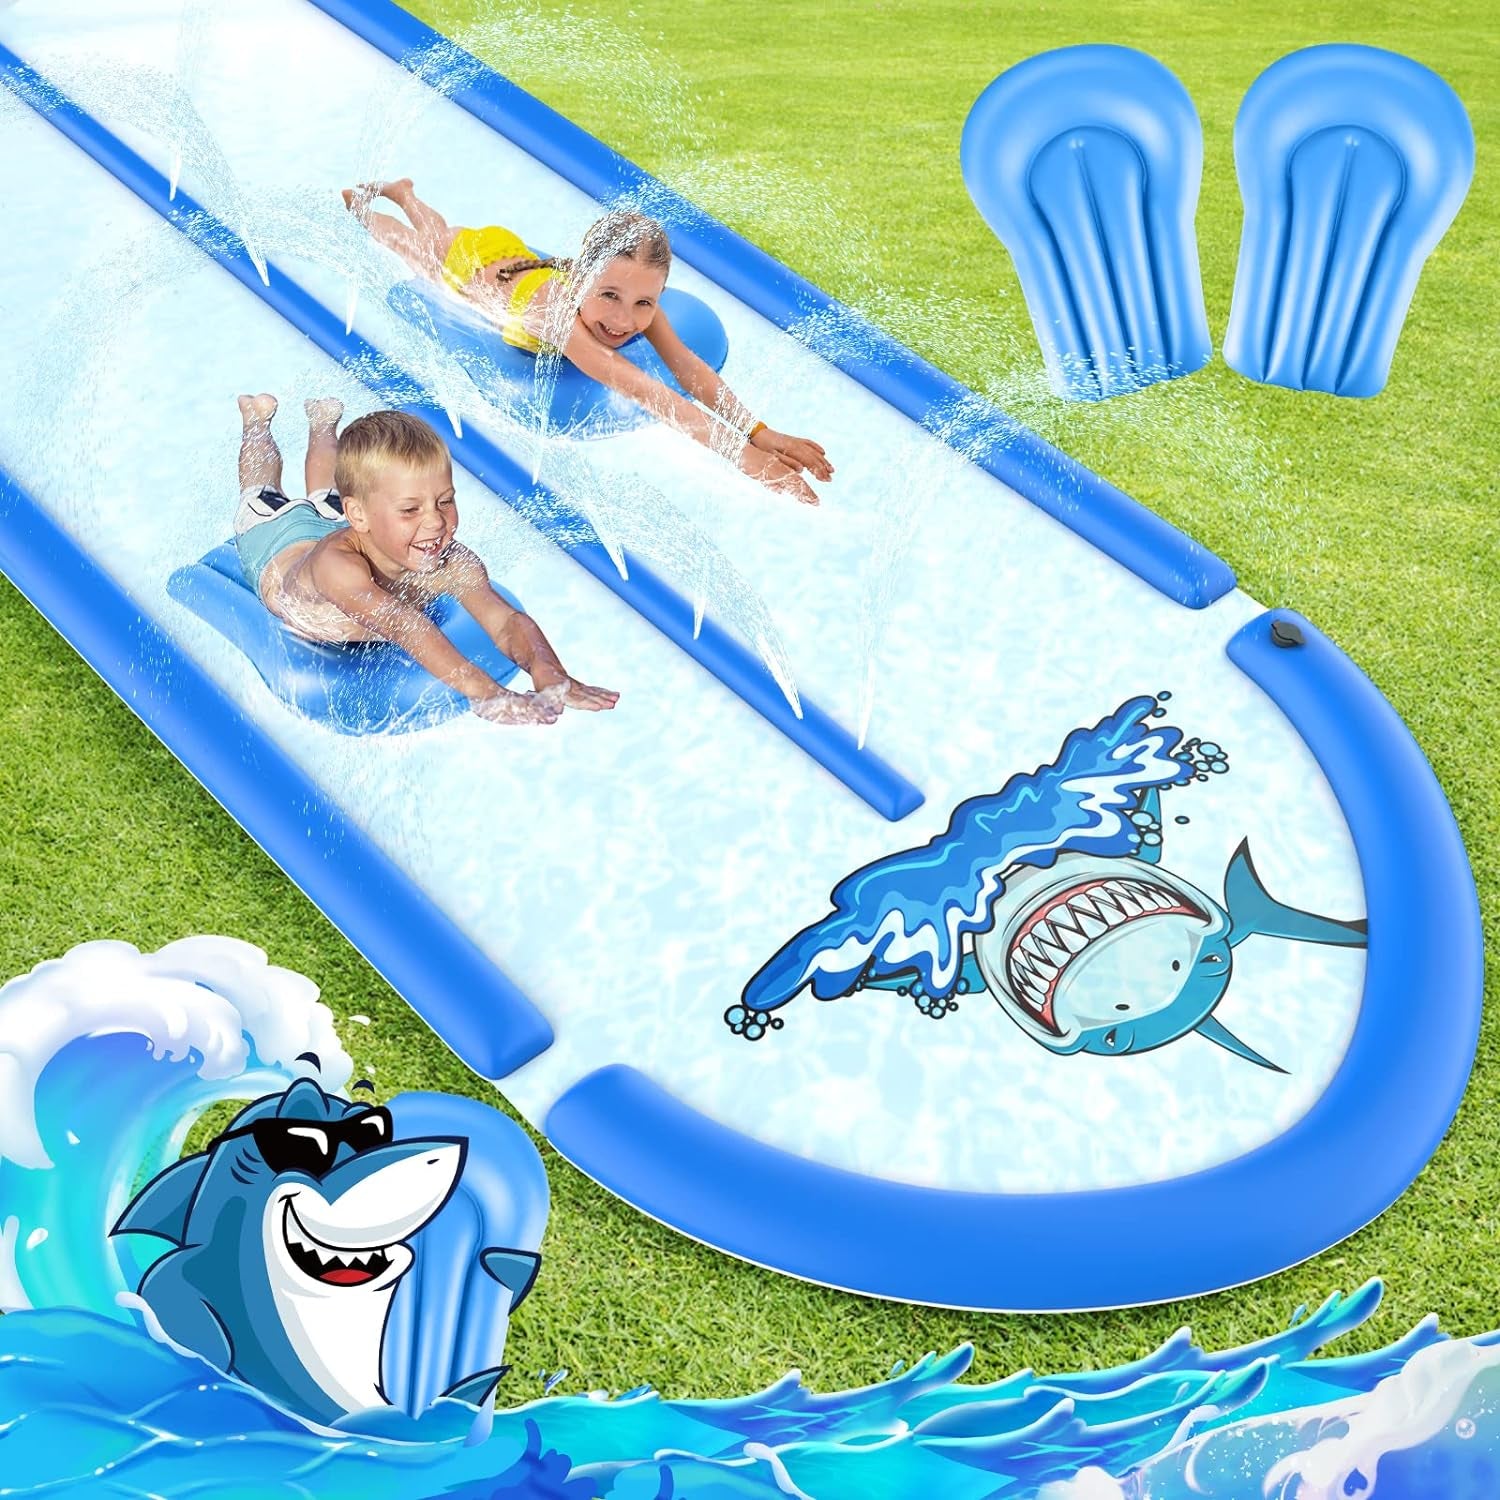 Slip and Slide Lawn Water Slide with 2 Bodyboards, 20FT Slip N Slide Heavy Duty Double Lane for Kids Backyard Games with Sprinkler, Summer Outdoor Water Toys outside Play for Kids and Adults